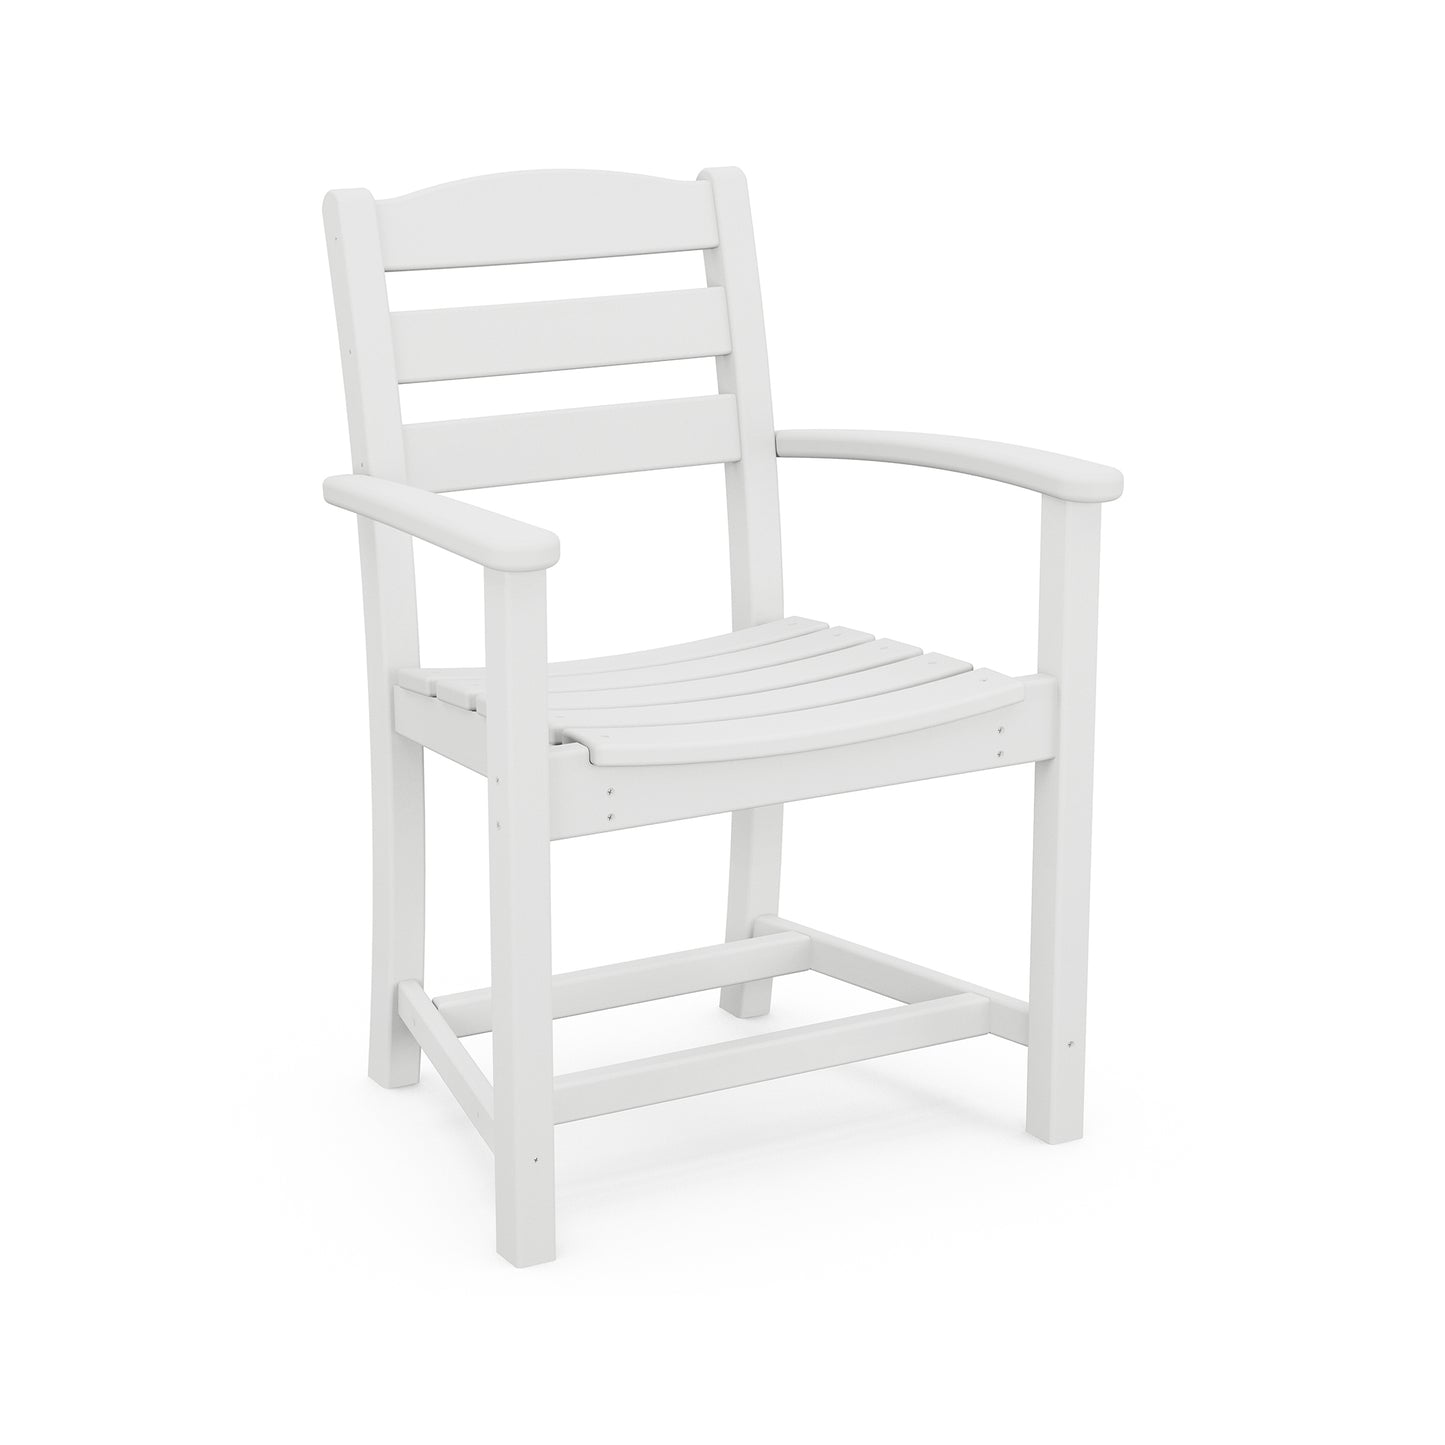 A white, traditional-style POLYWOOD La Casa Cafe Outdoor Dining Arm Chair made of wood or a durable wood-like material, featuring armrests and vertical back slats, isolated on a white background.